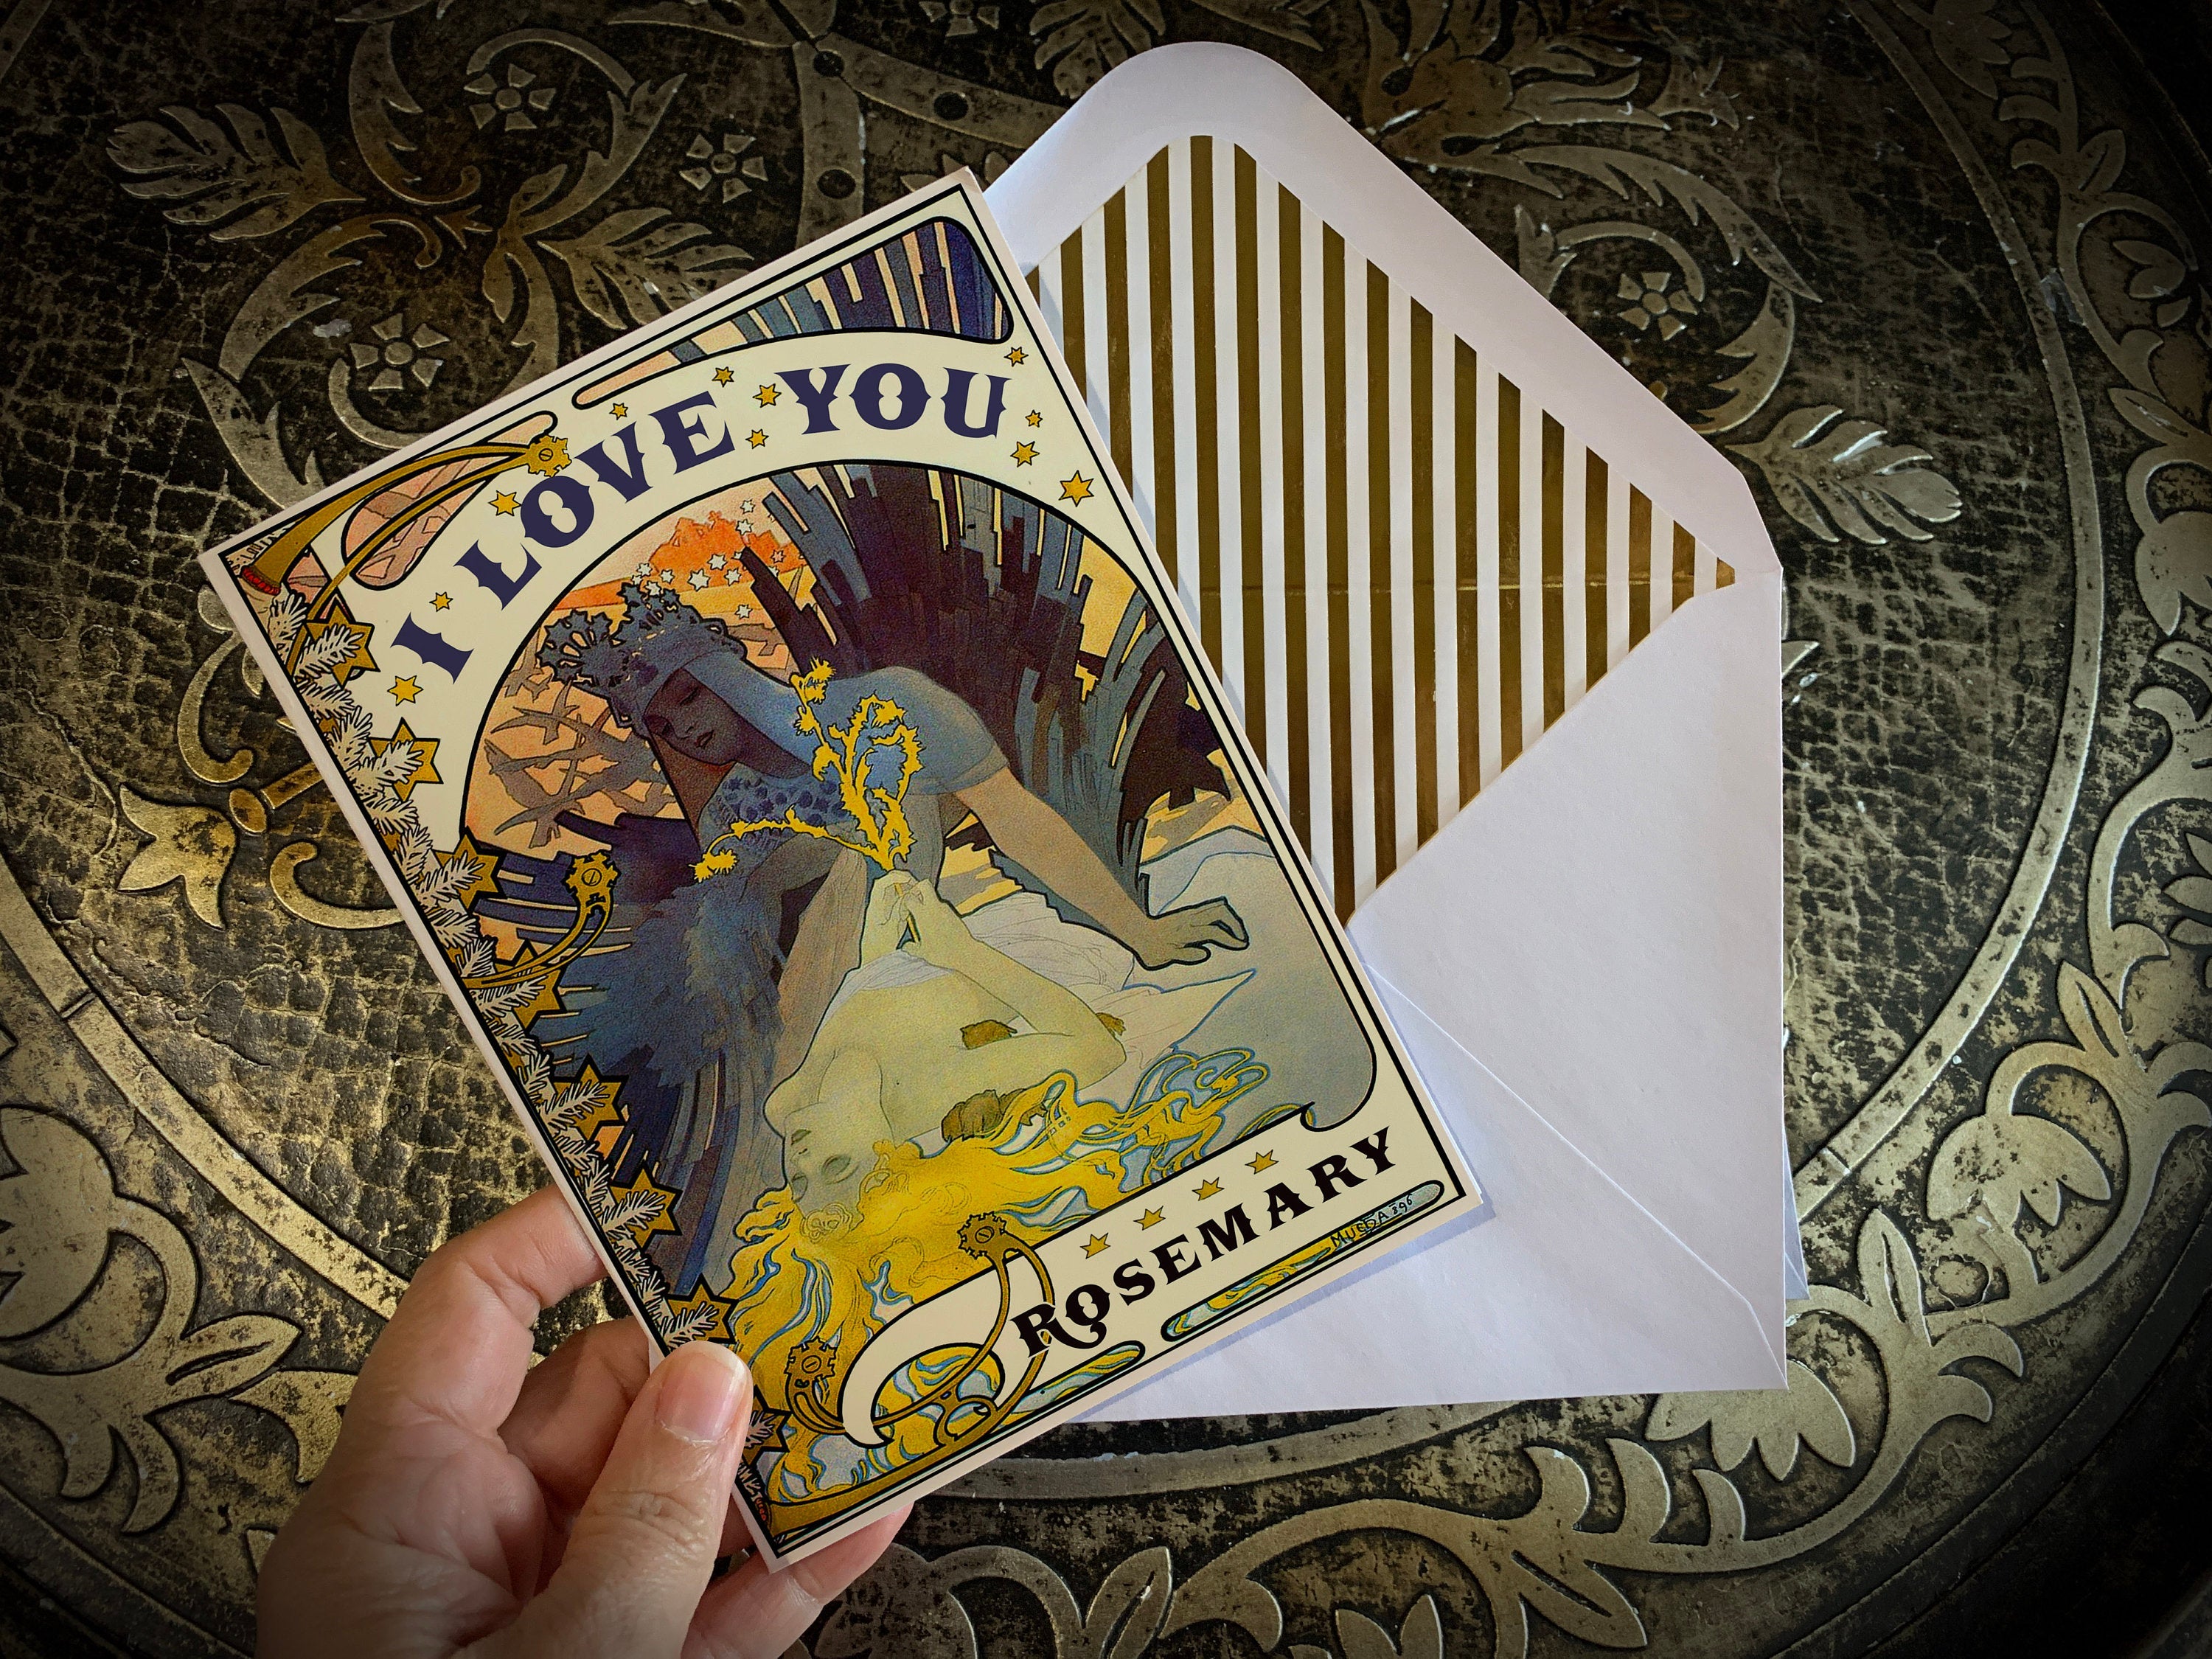 Personalized, I Love You, Celestial Goddesses, Lesbian Valentine's Day Greeting Card with Gold Foil Envelope, 1 Card/Envelope